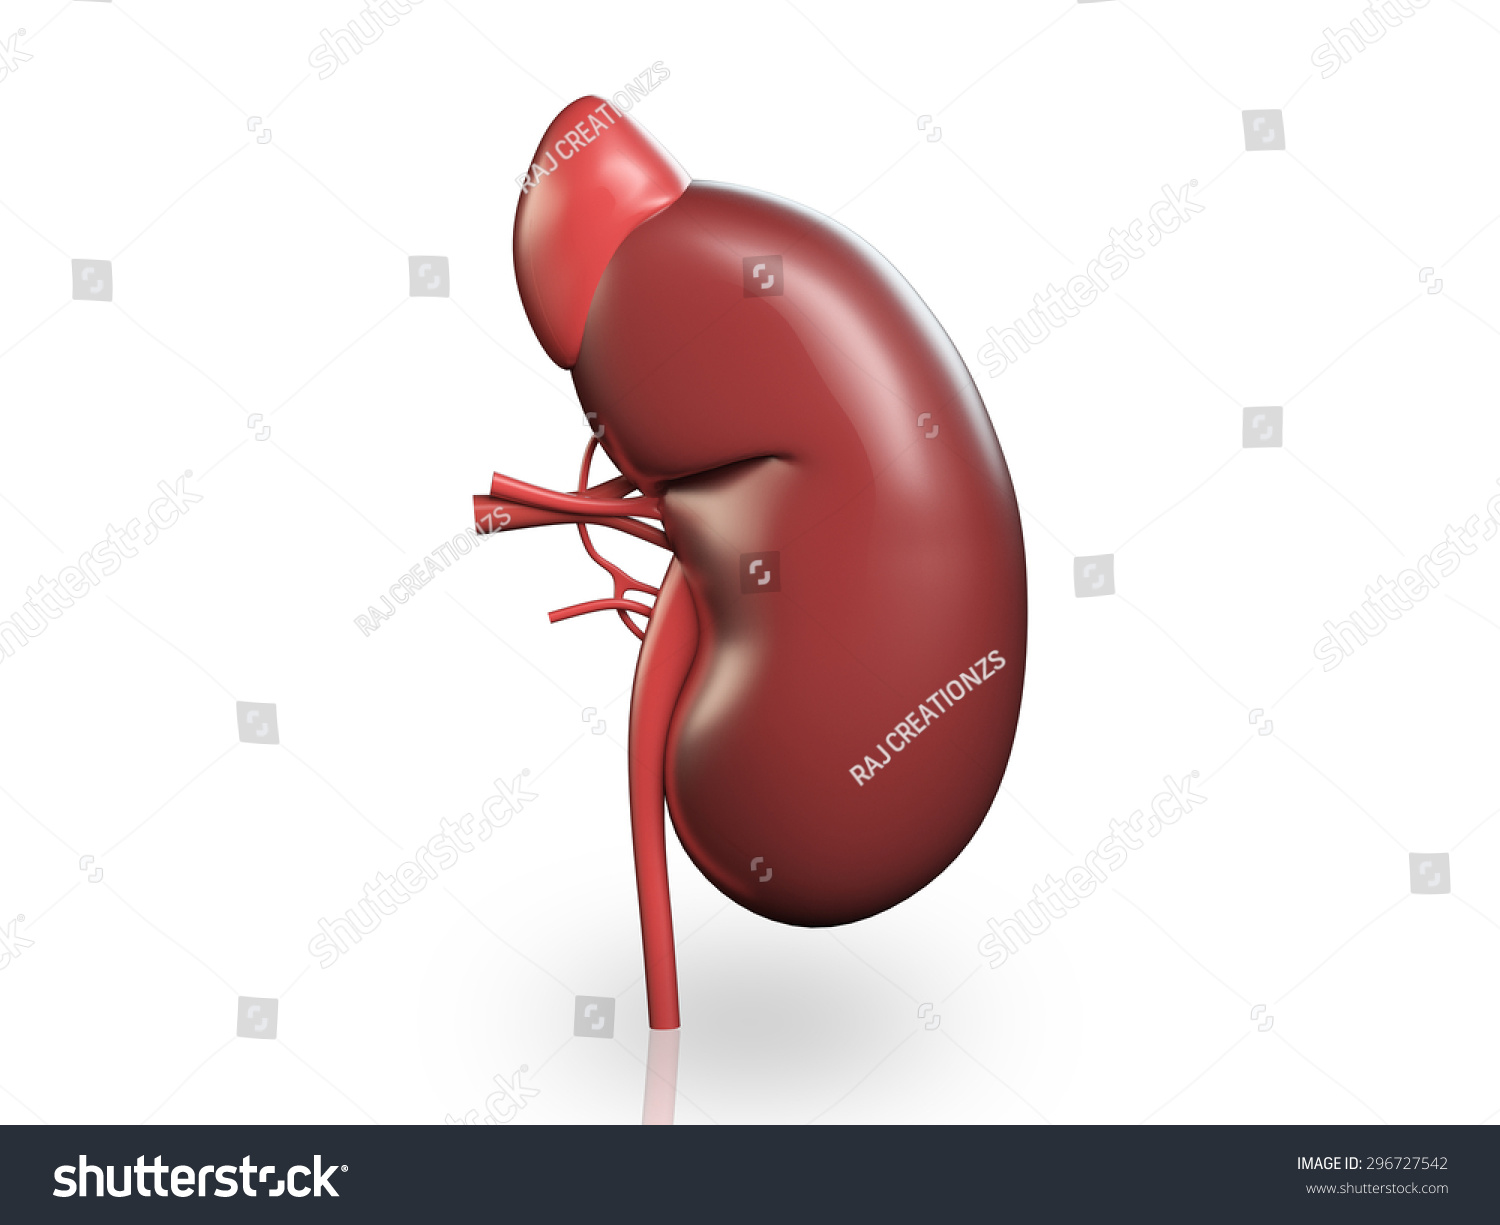 3d Kidney Isolated On White Background Stock Photo 296727542 : Shutterstock